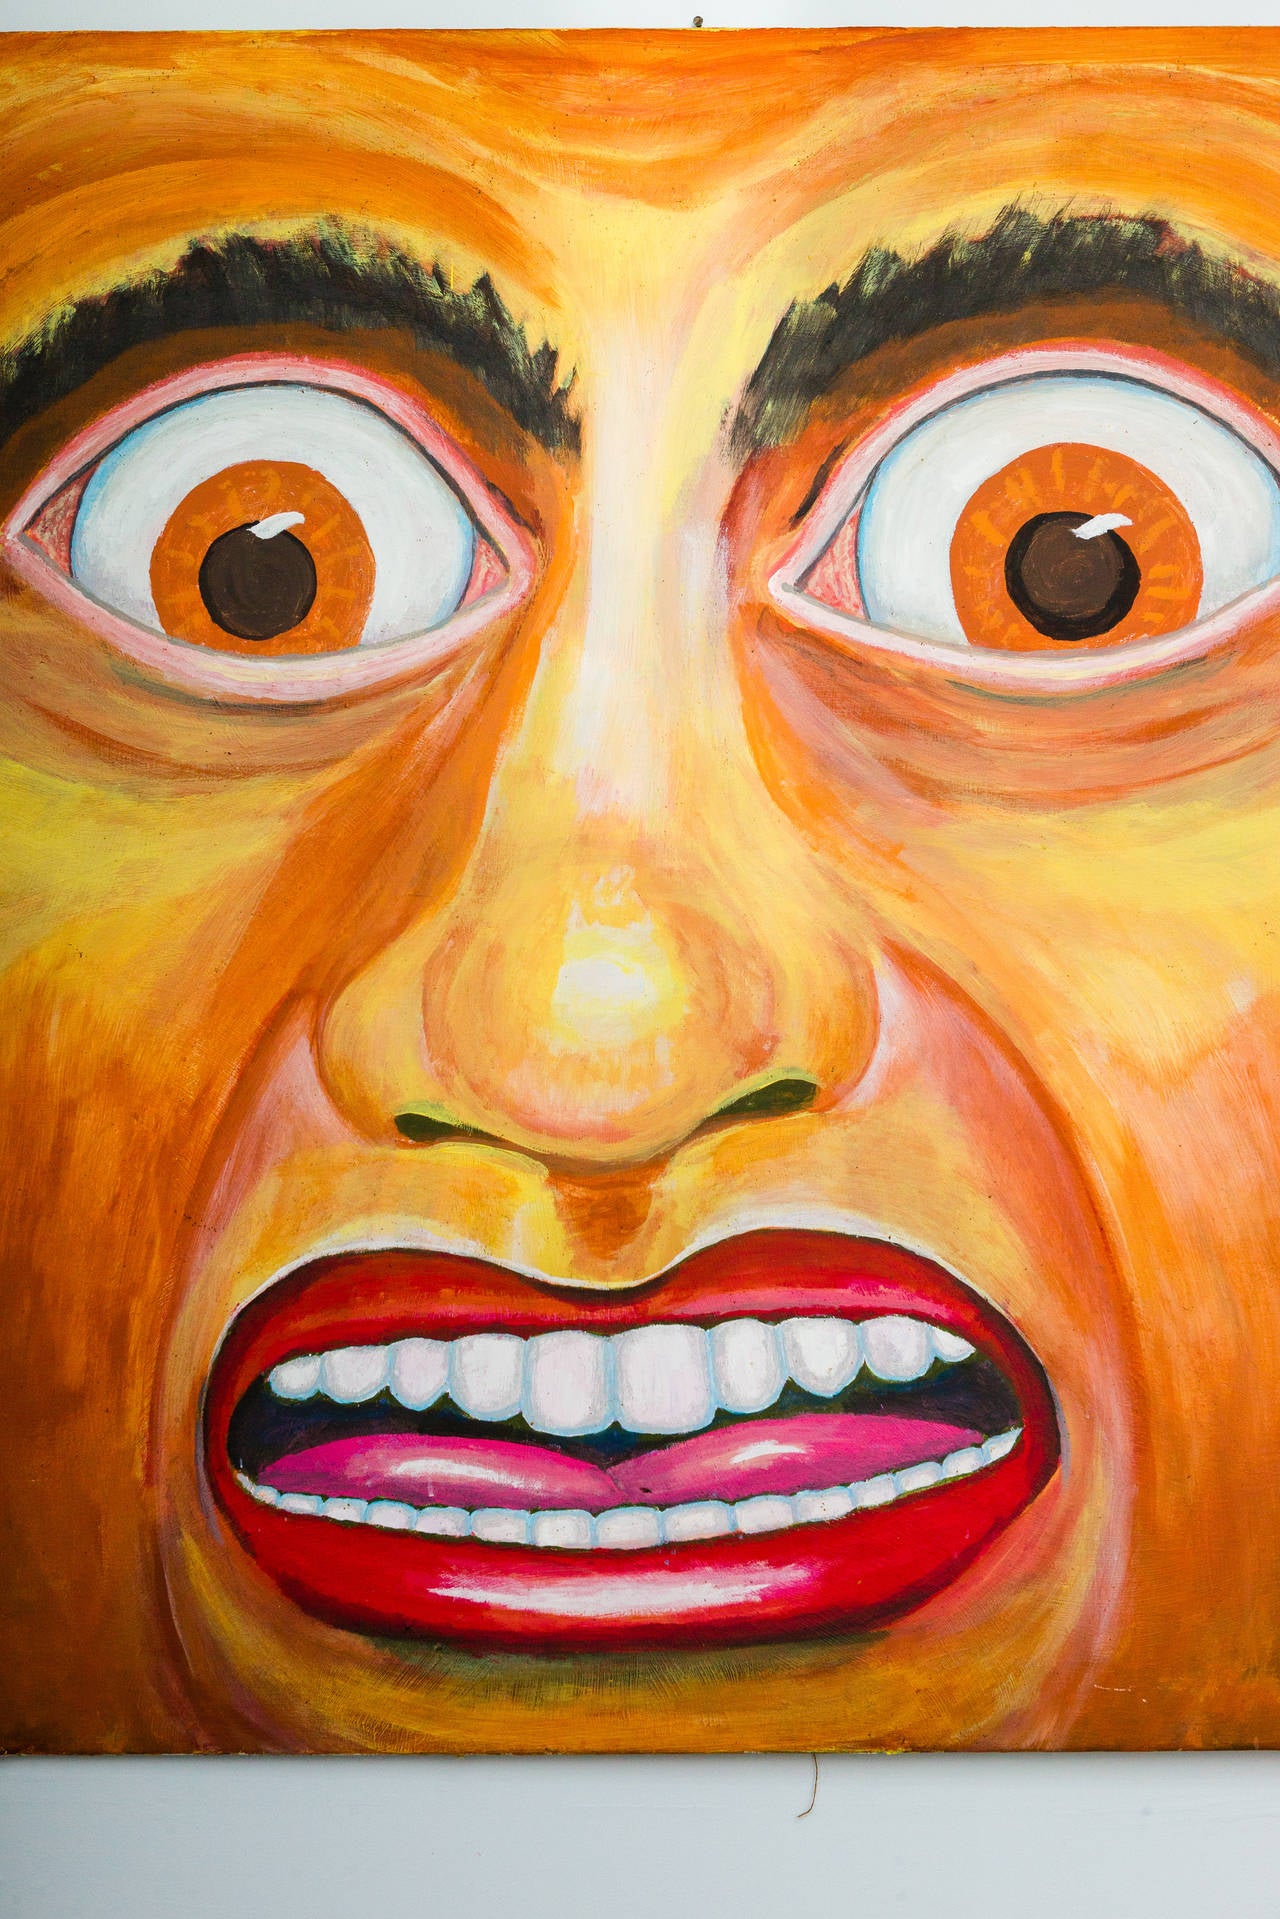 Crazy face surreal oil on canvas painting by Carol Lynch. She is an artist and wife of Jay Lynch artist of underground comics, garbage pal kids, wacky packages, etc.